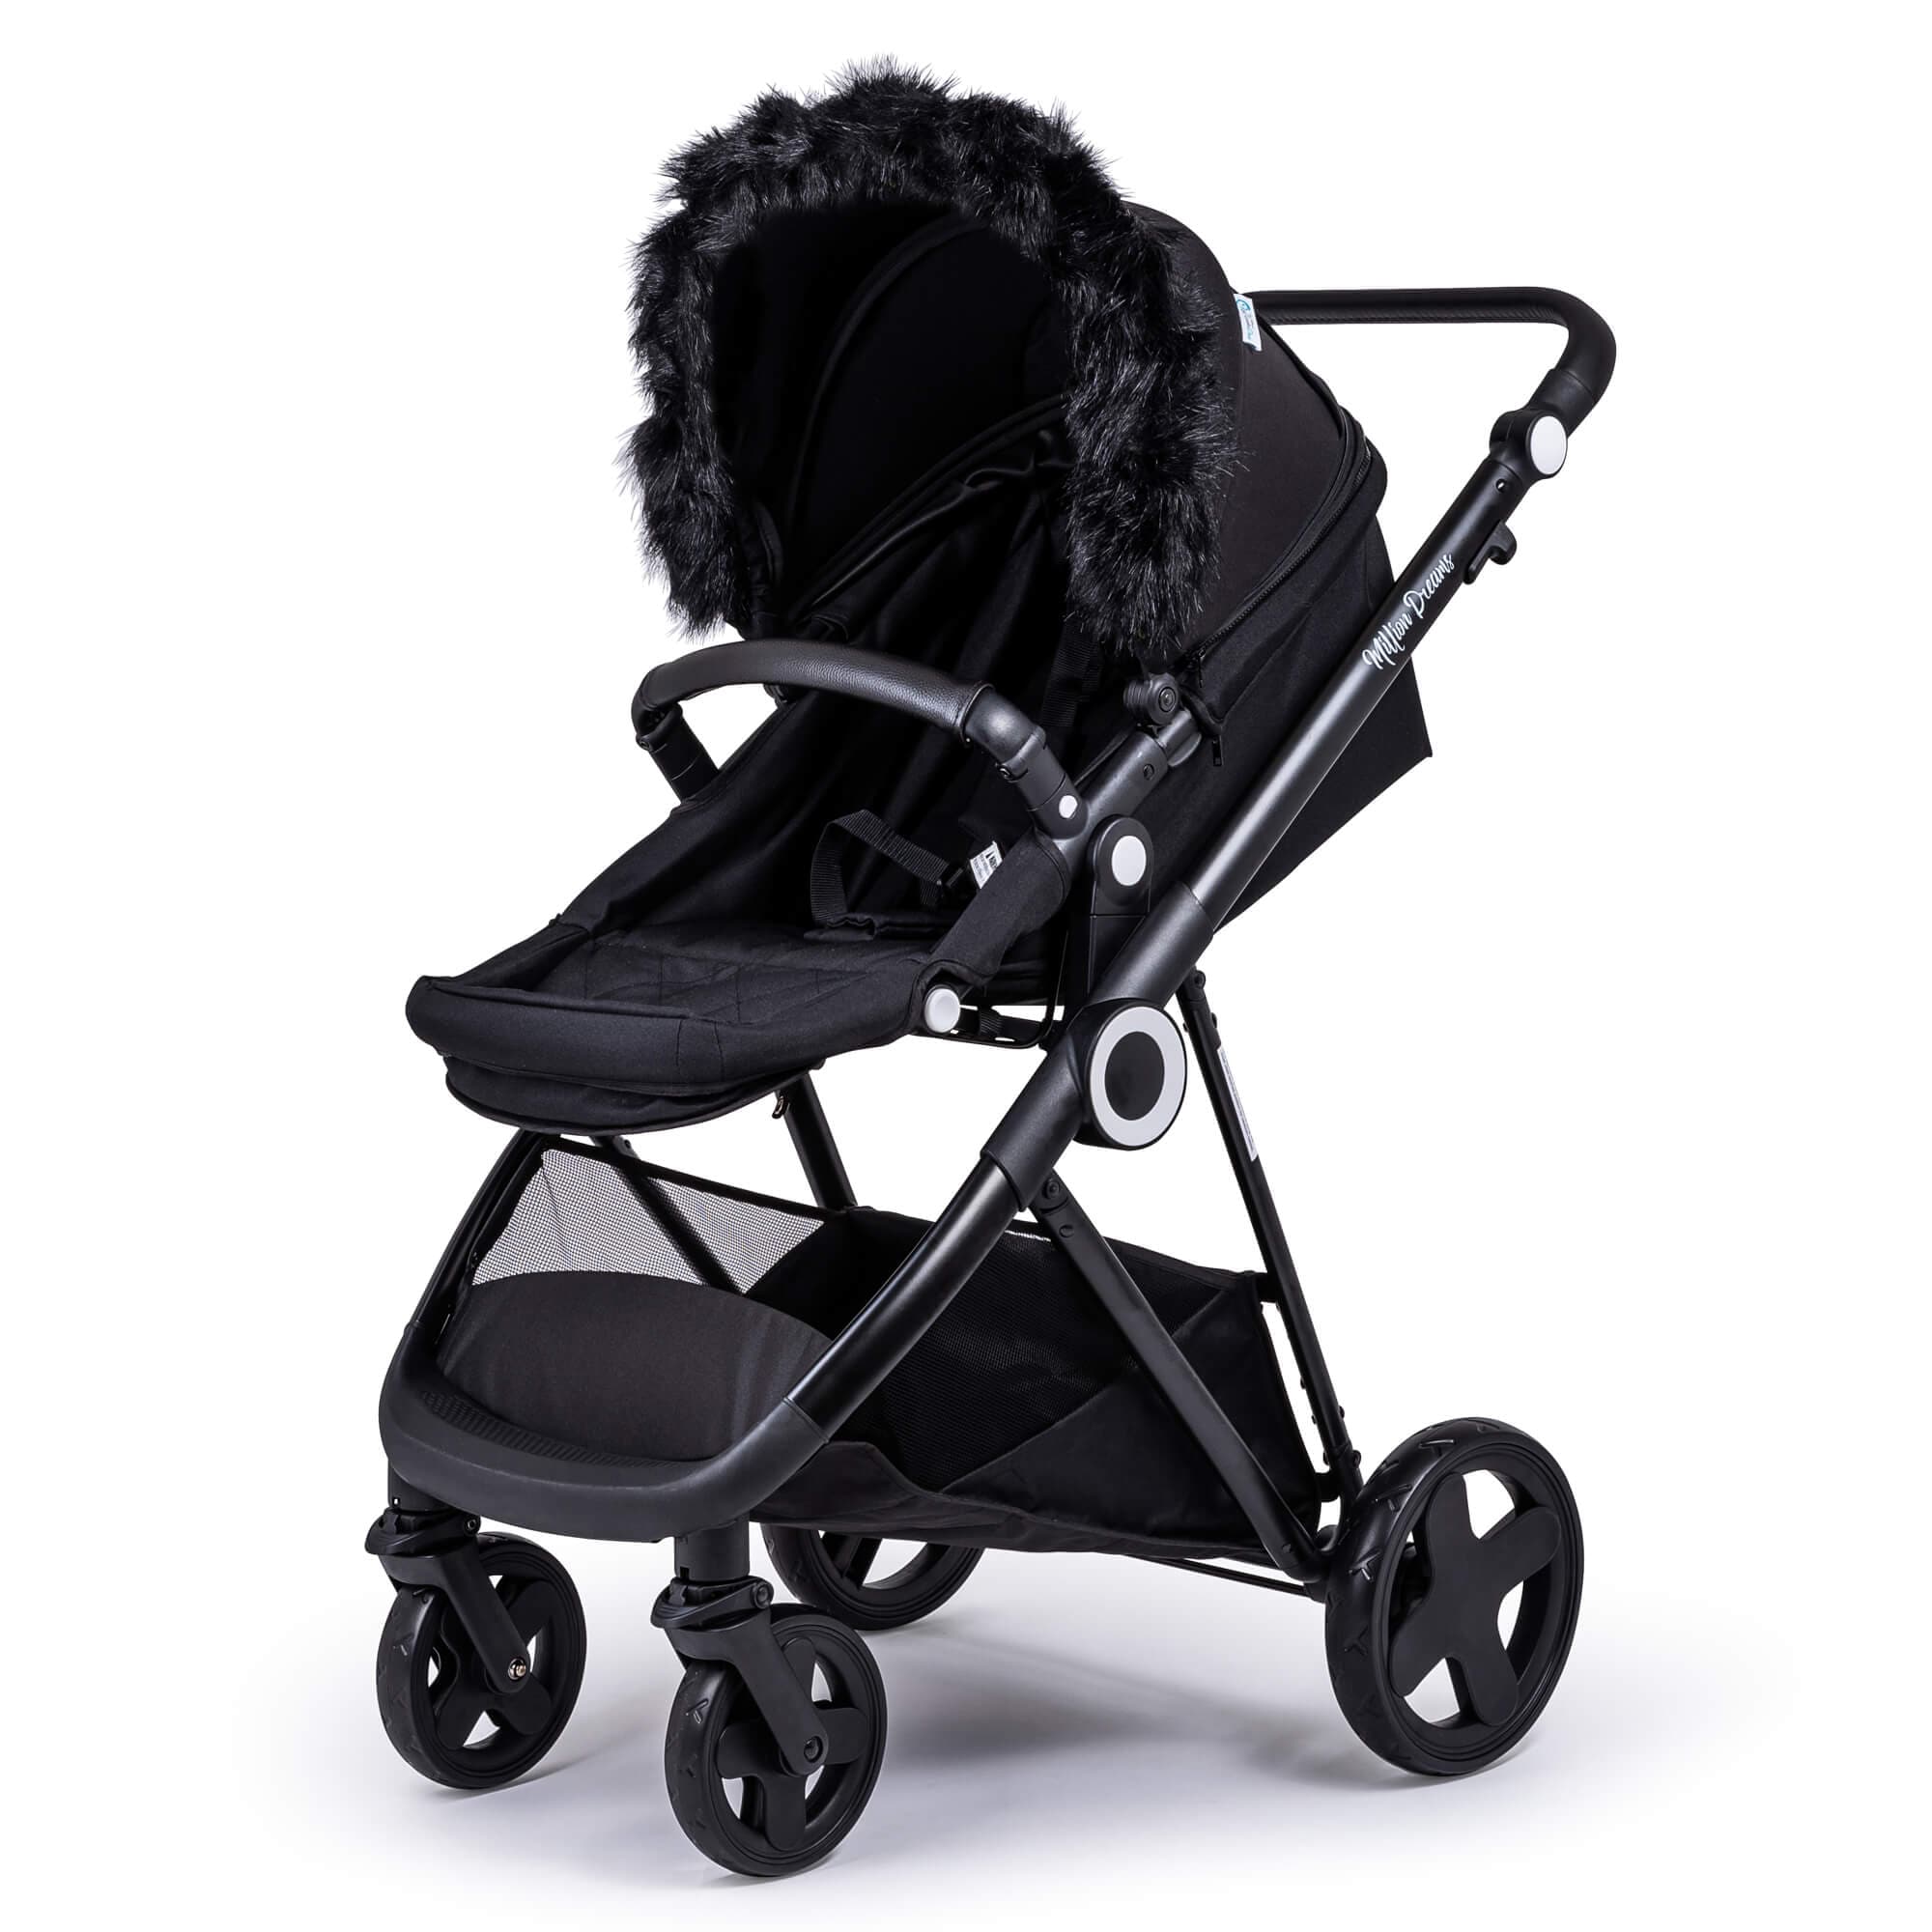 Pram Fur Hood Trim Attachment for Pushchair Compatible with Cybex - Black / Fits All Models | For Your Little One